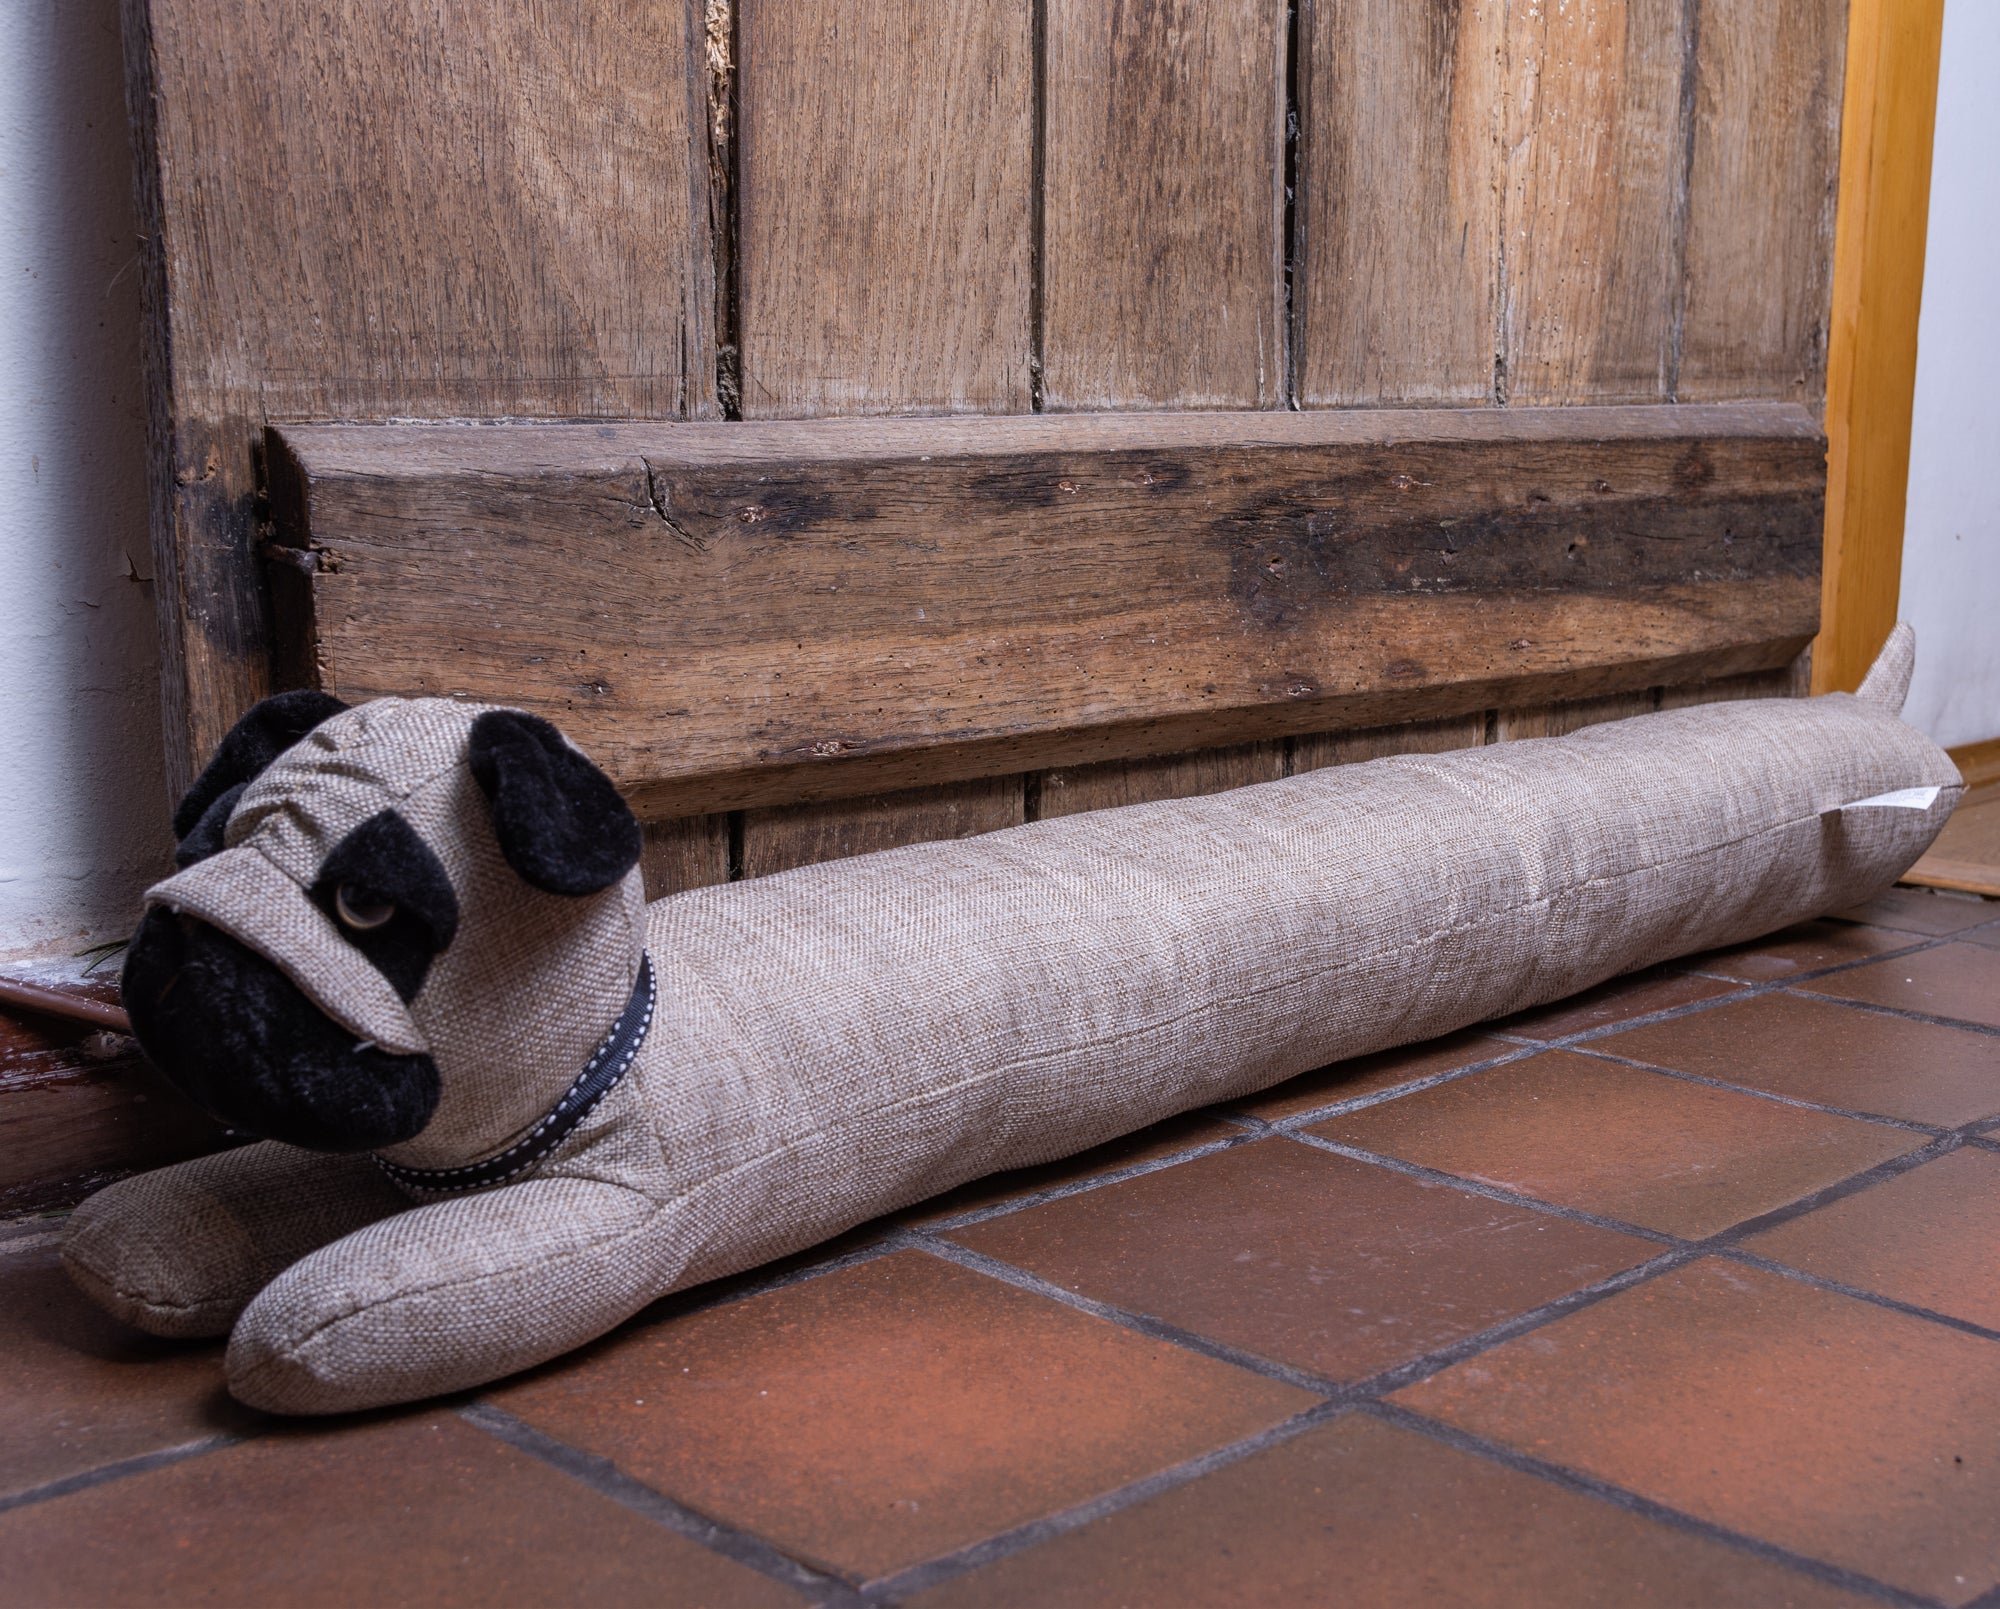 Draught Excluder (Pug) - iN Home - DSL